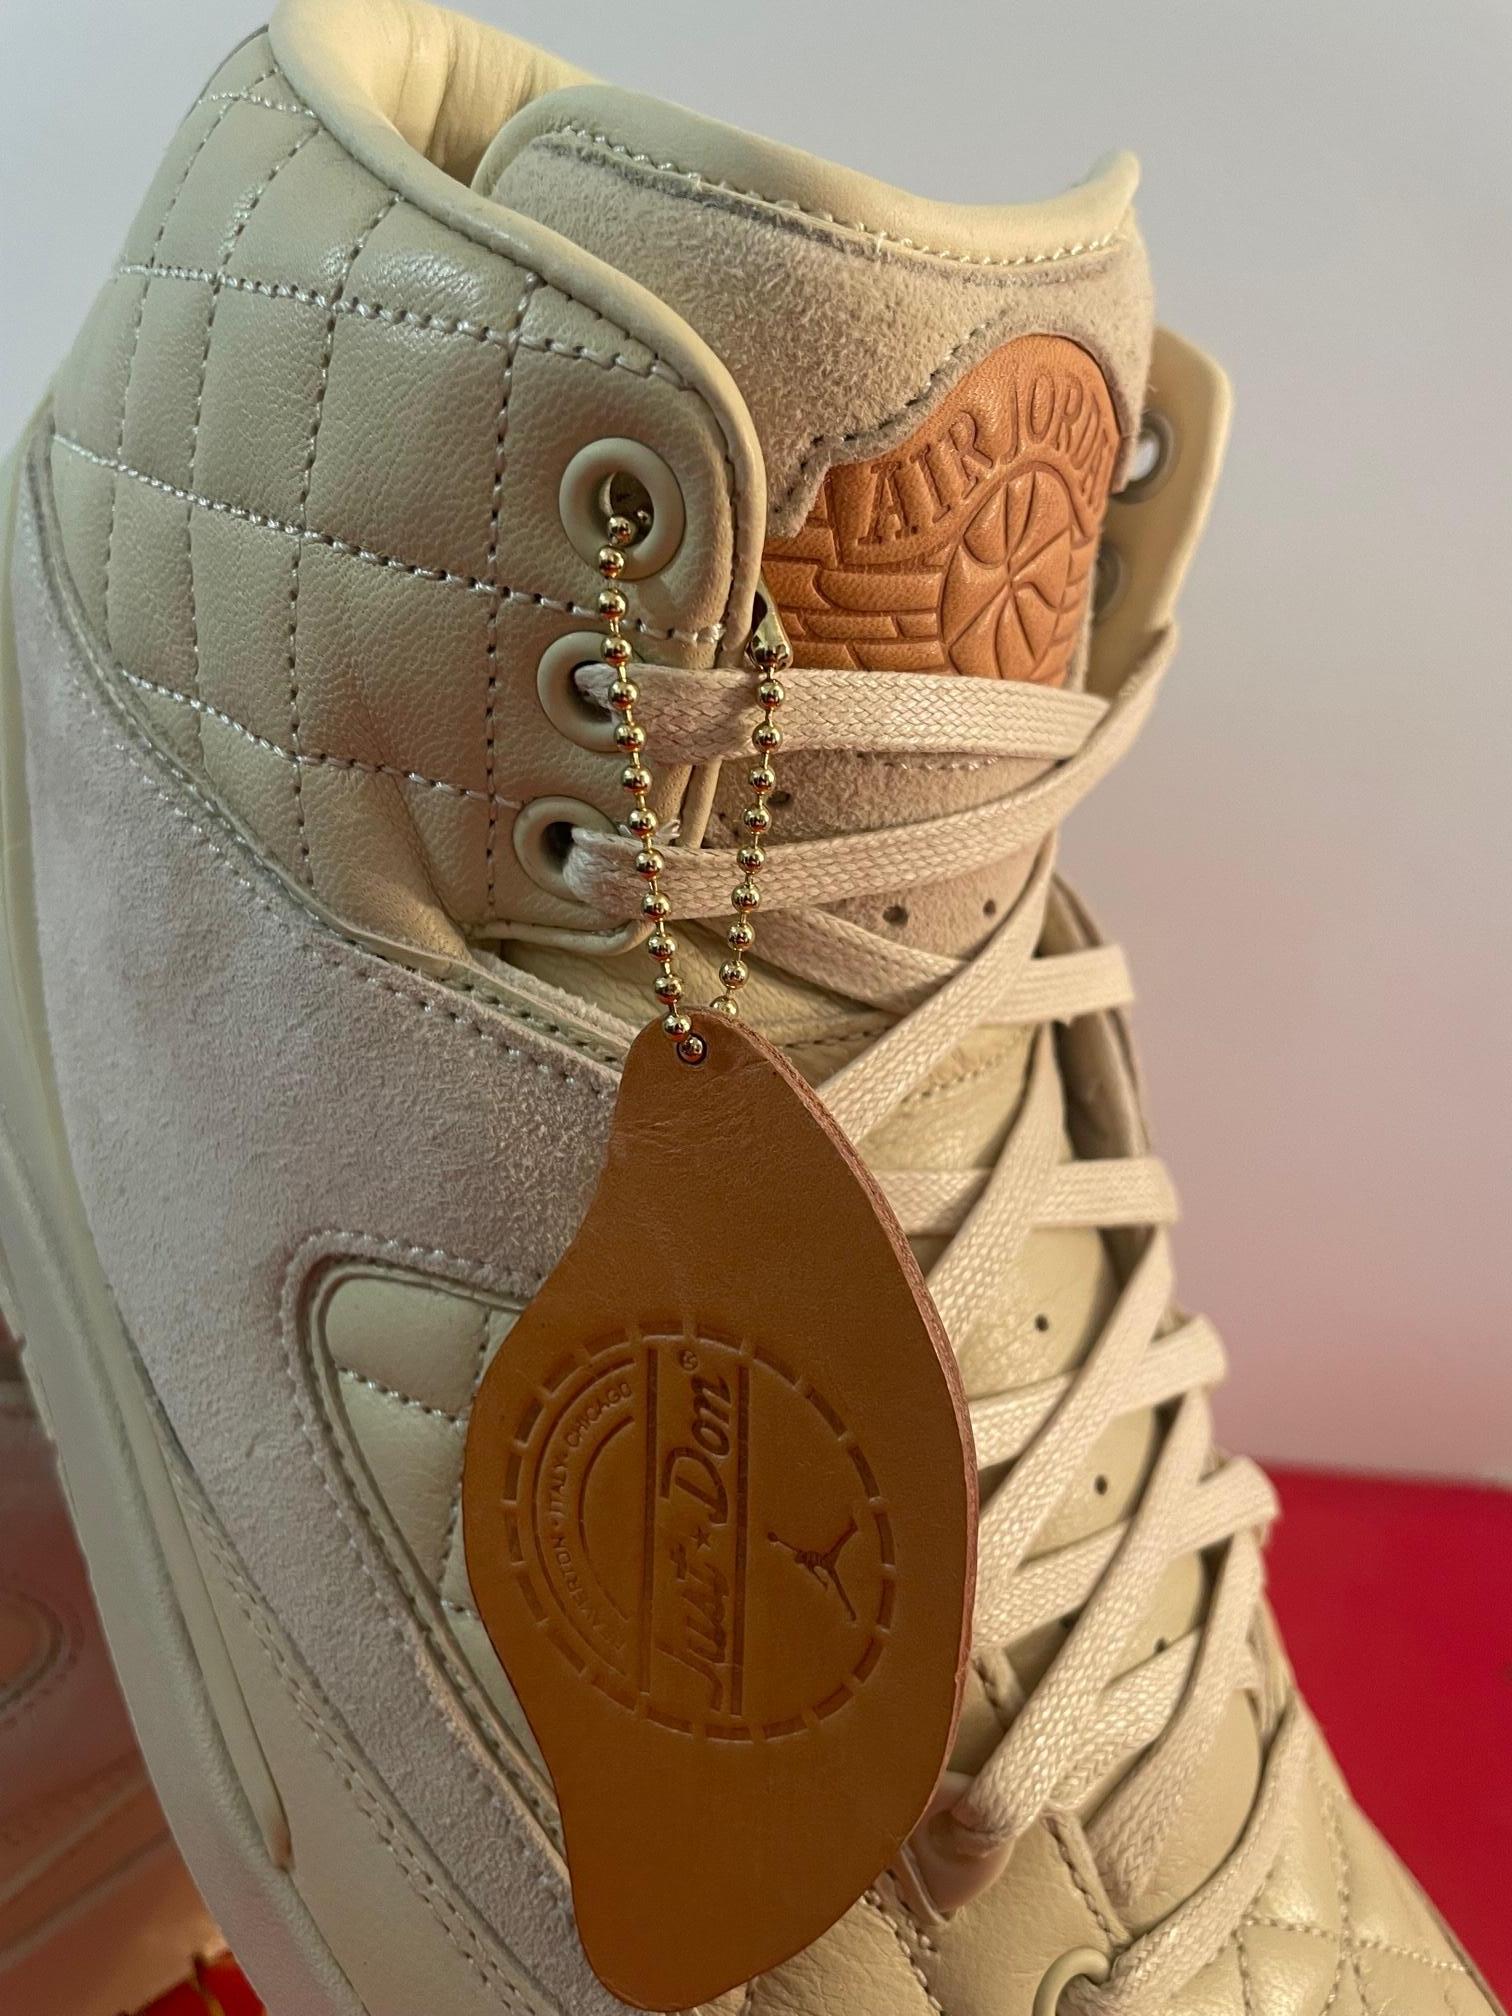 Rare Nike Shoes Just Don x Air Jordan 2 Retro “Beach” In Excellent Condition For Sale In Milano, IT